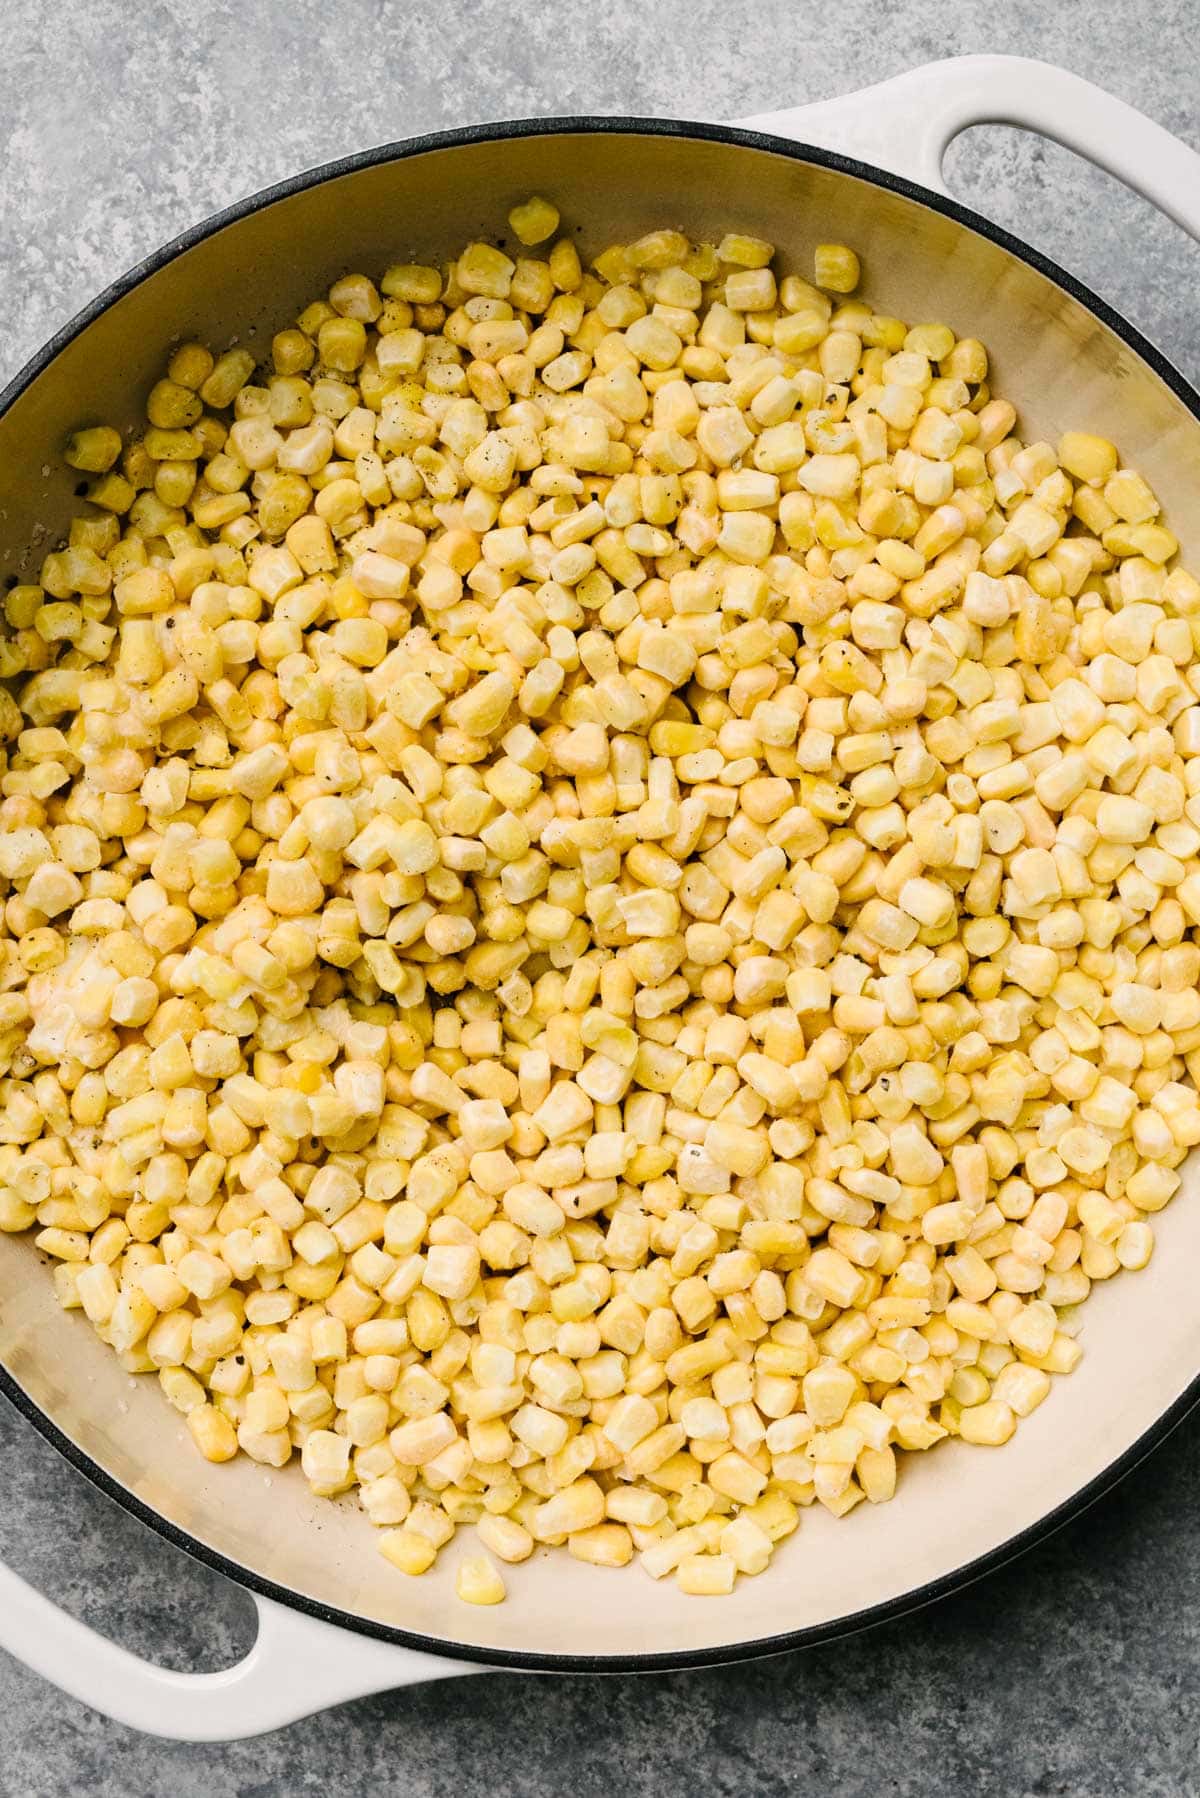 Frozen corn tossed with melted butter in a large grey enameled skillet.